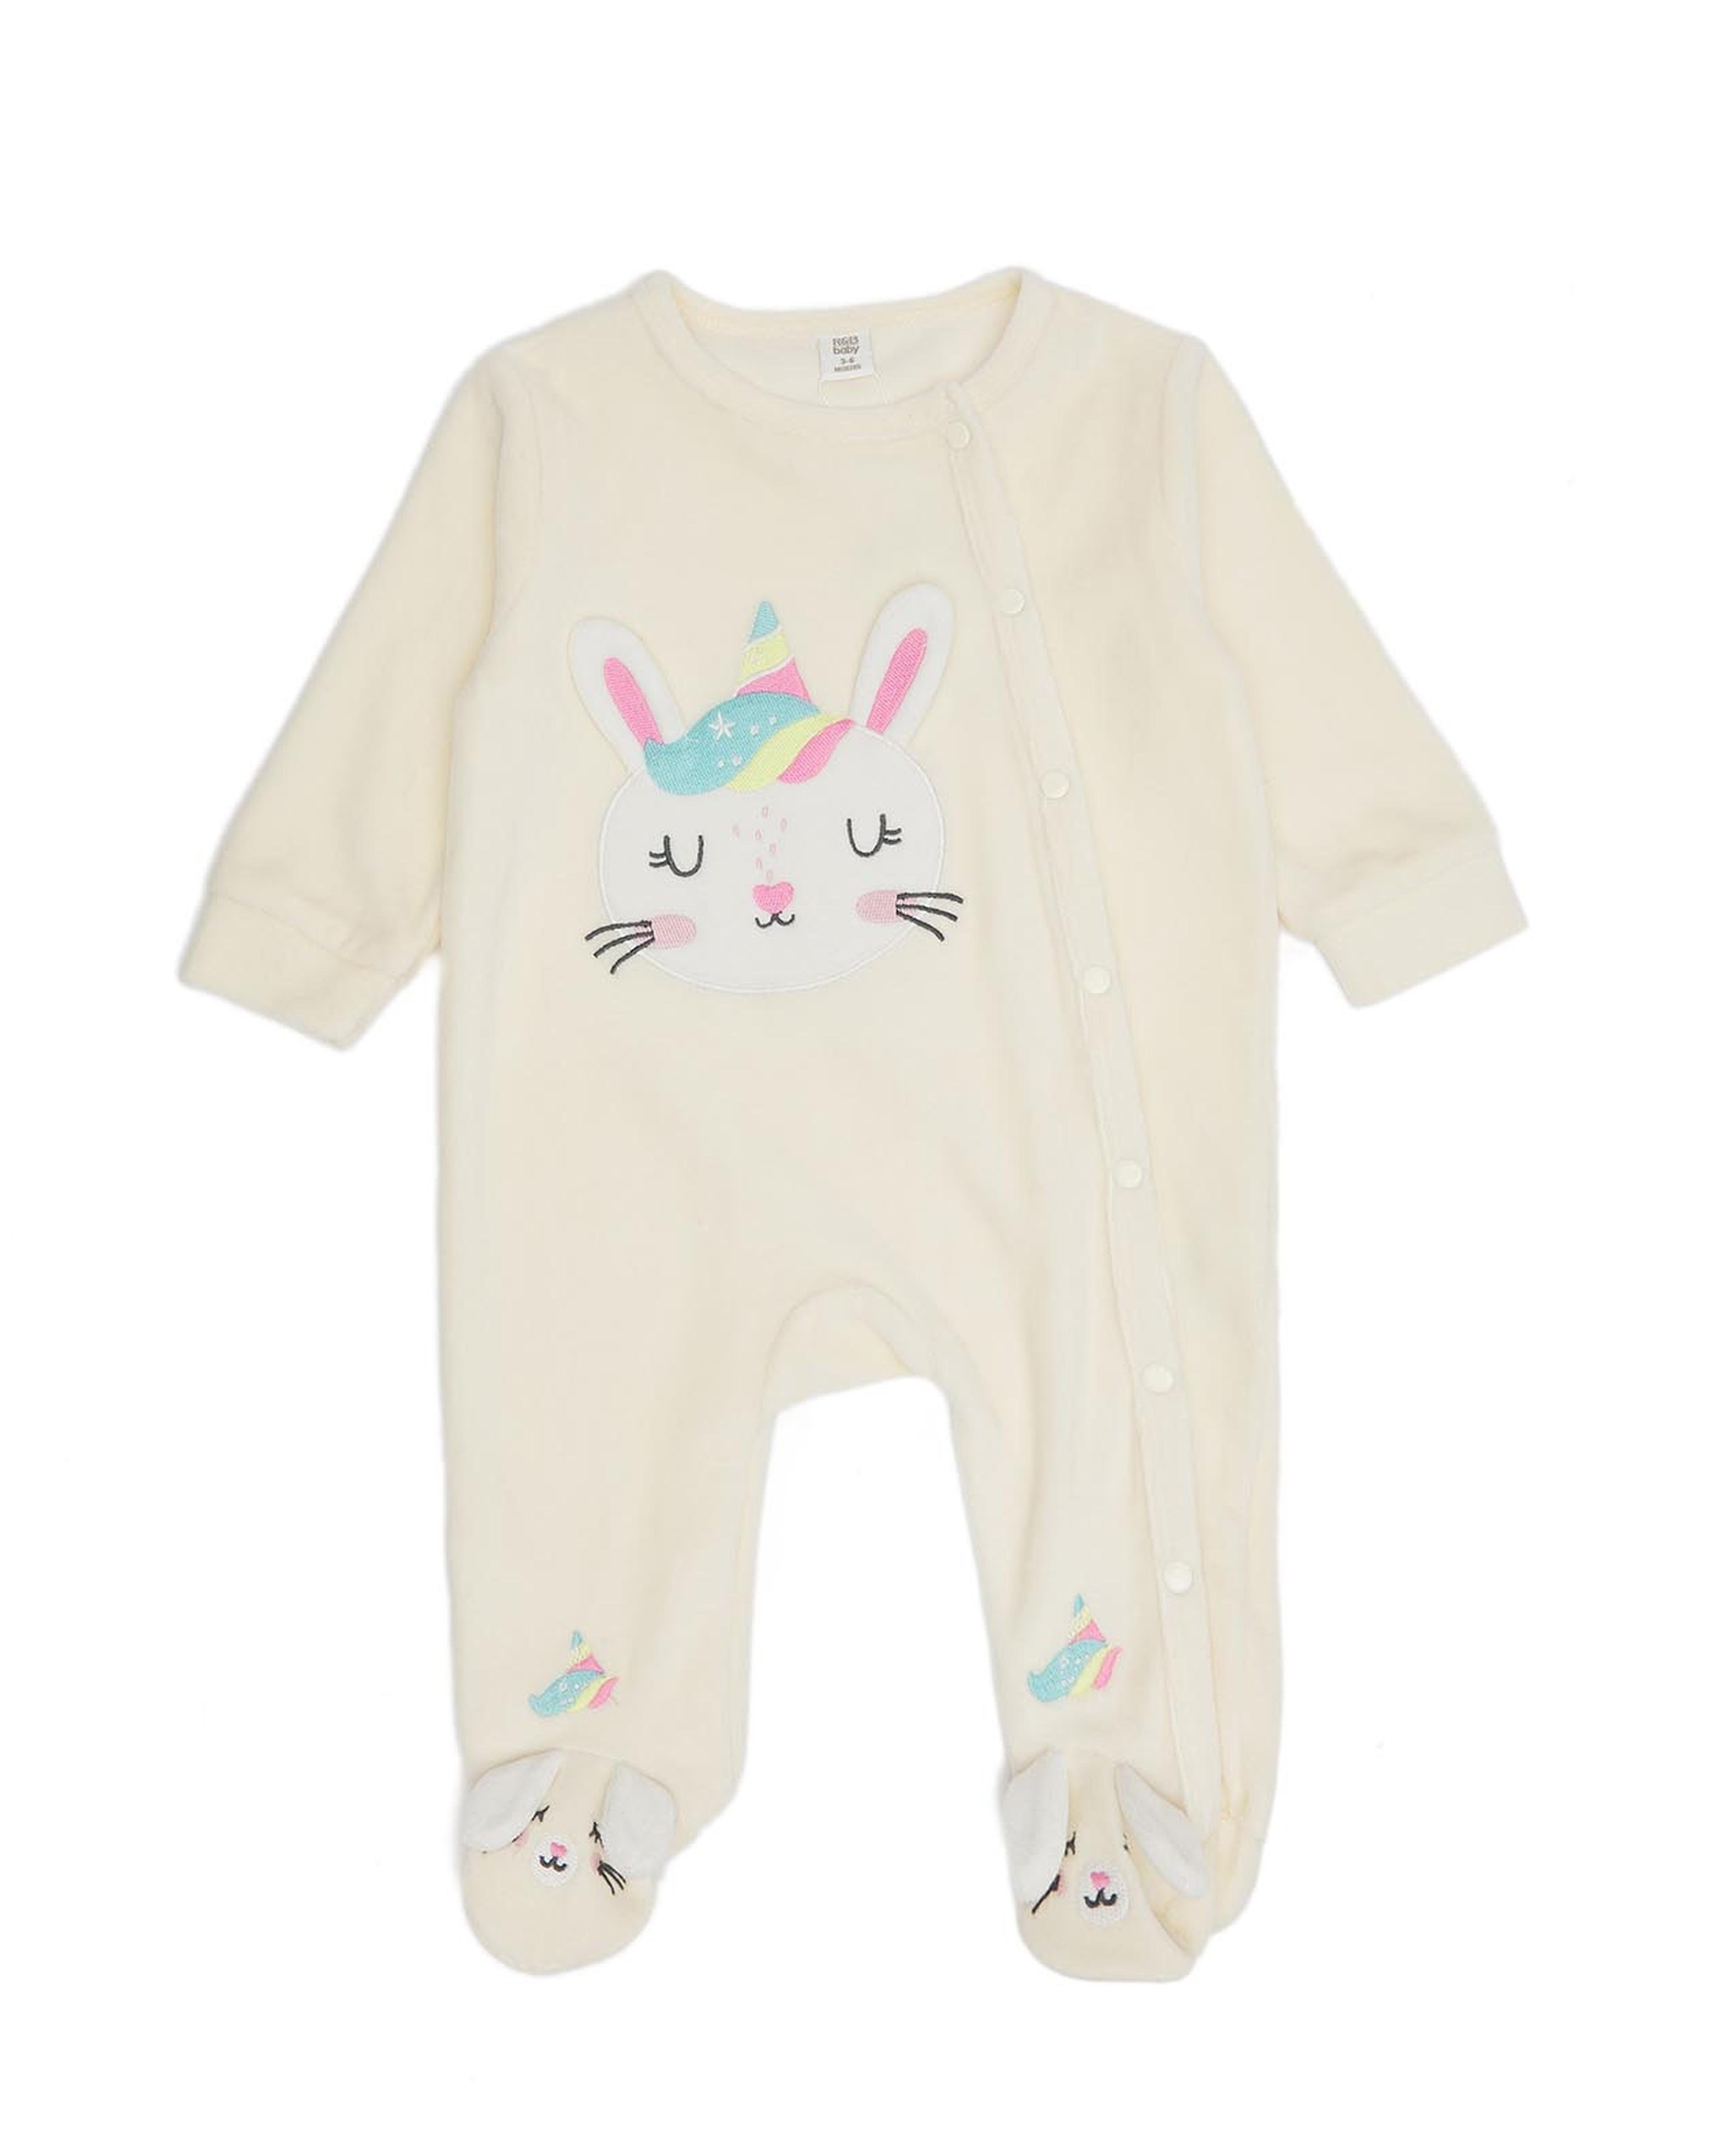 Applique Detail Footed Sleepsuit with Long Sleeves